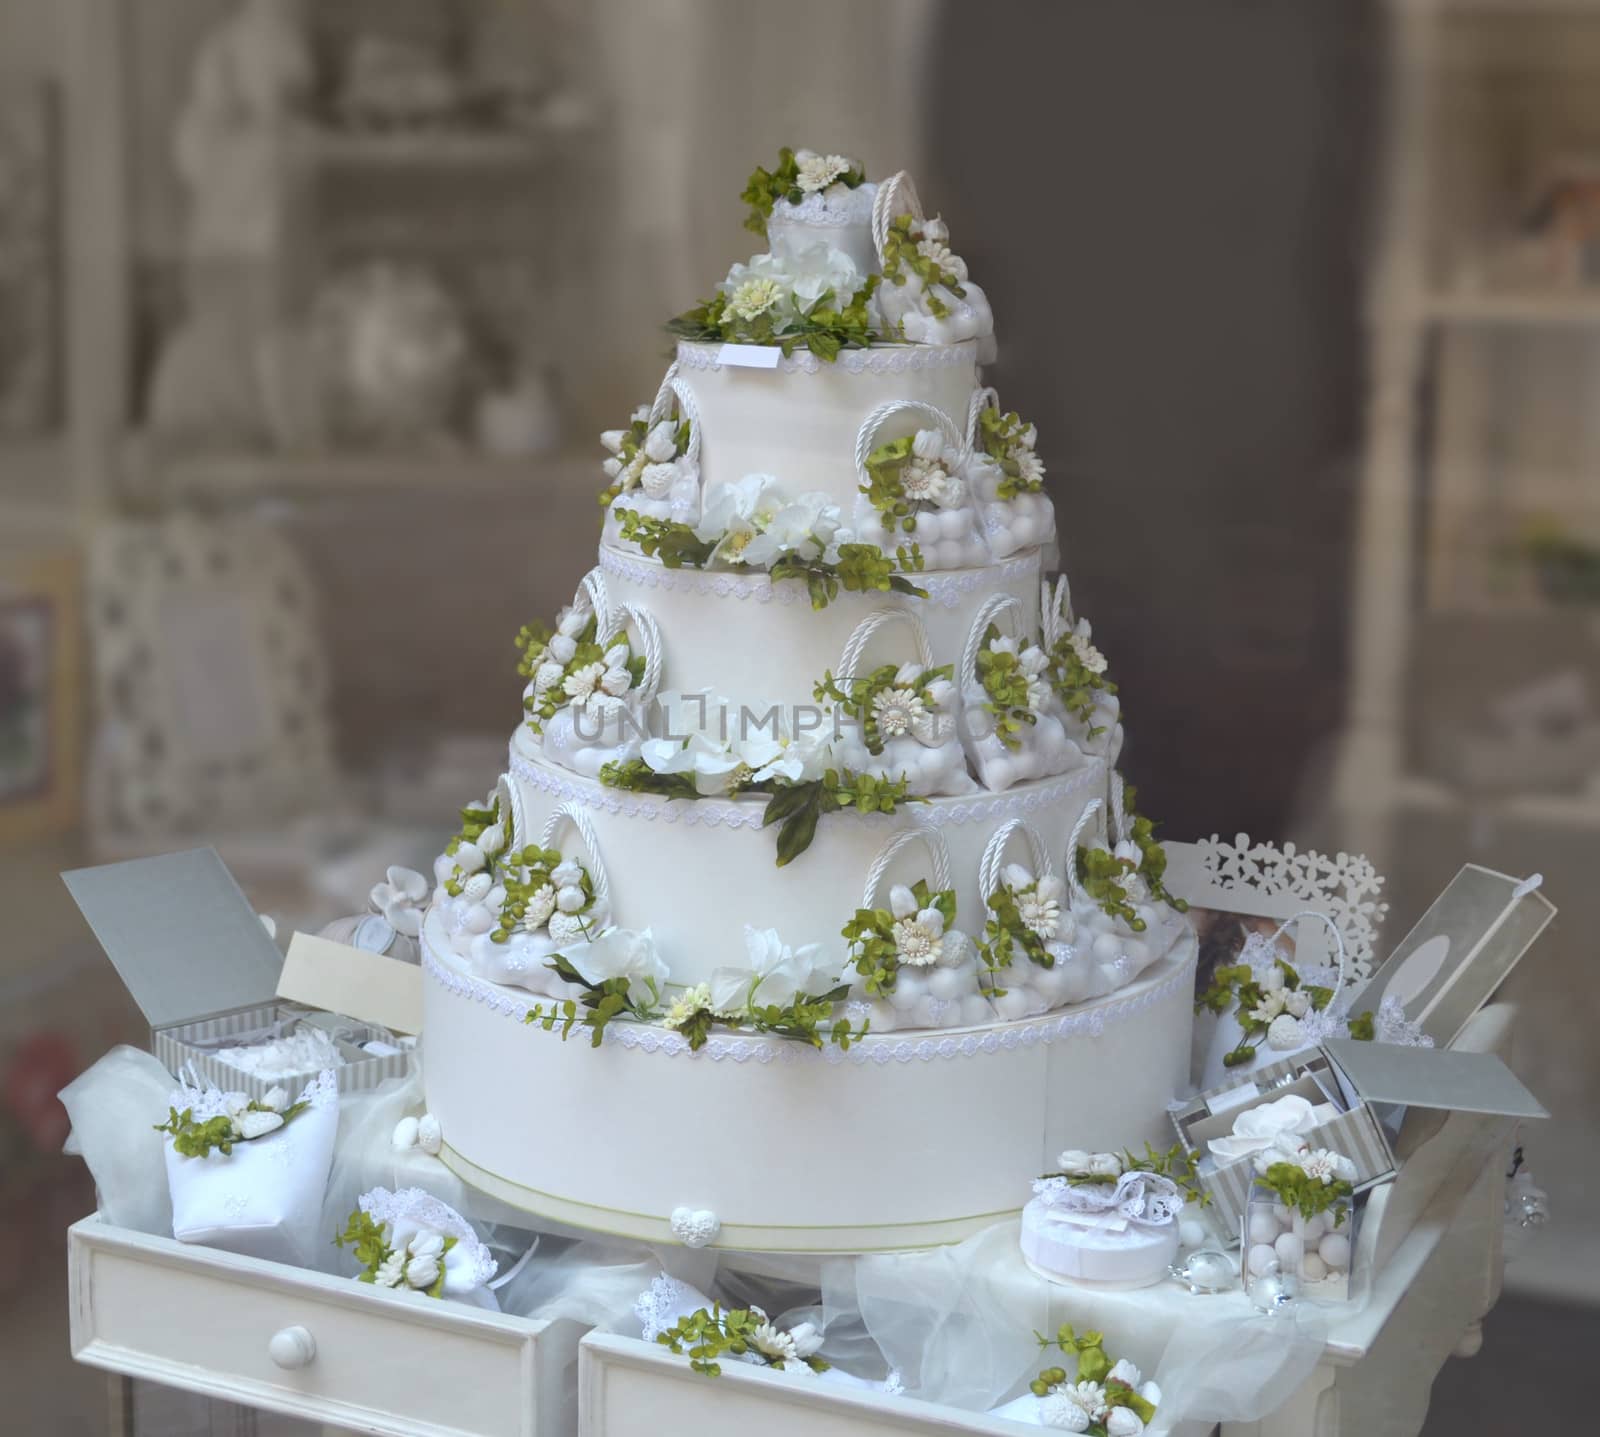 Gorgeous white and green multi tiered wedding cake